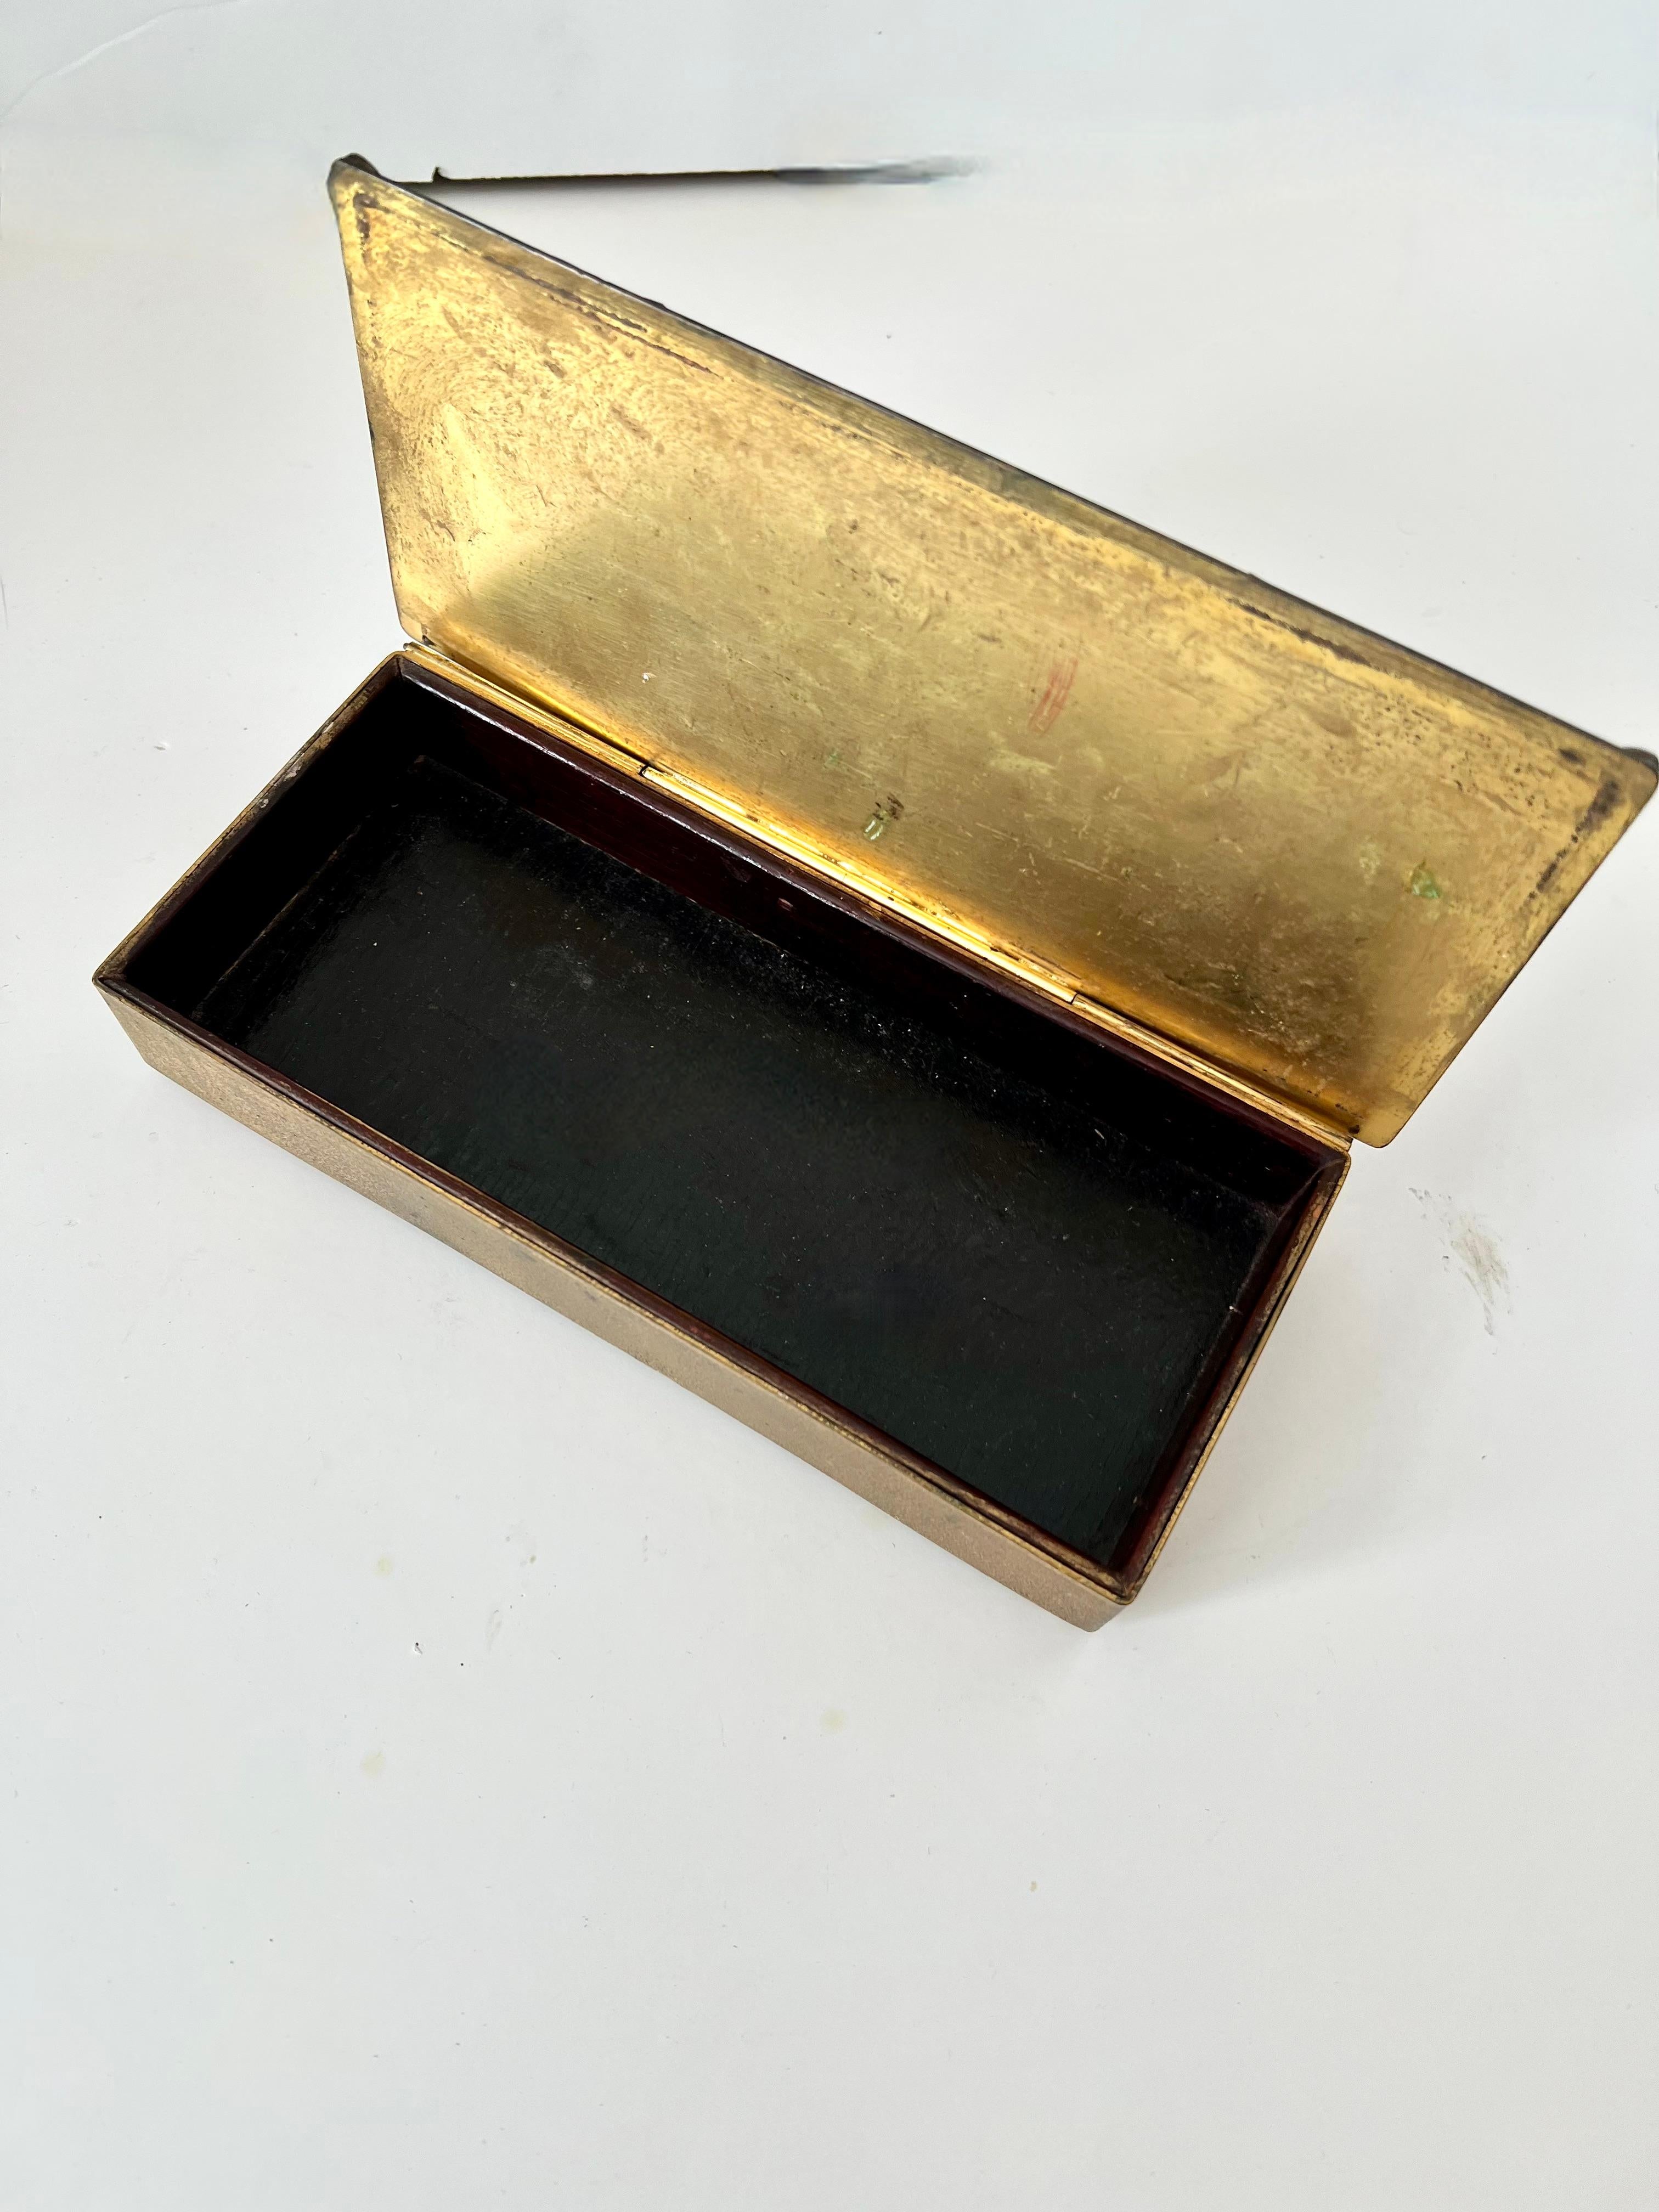 Empire Art Gold Box with Decorative hinged Lid and Jewels 1920 In Good Condition For Sale In Los Angeles, CA